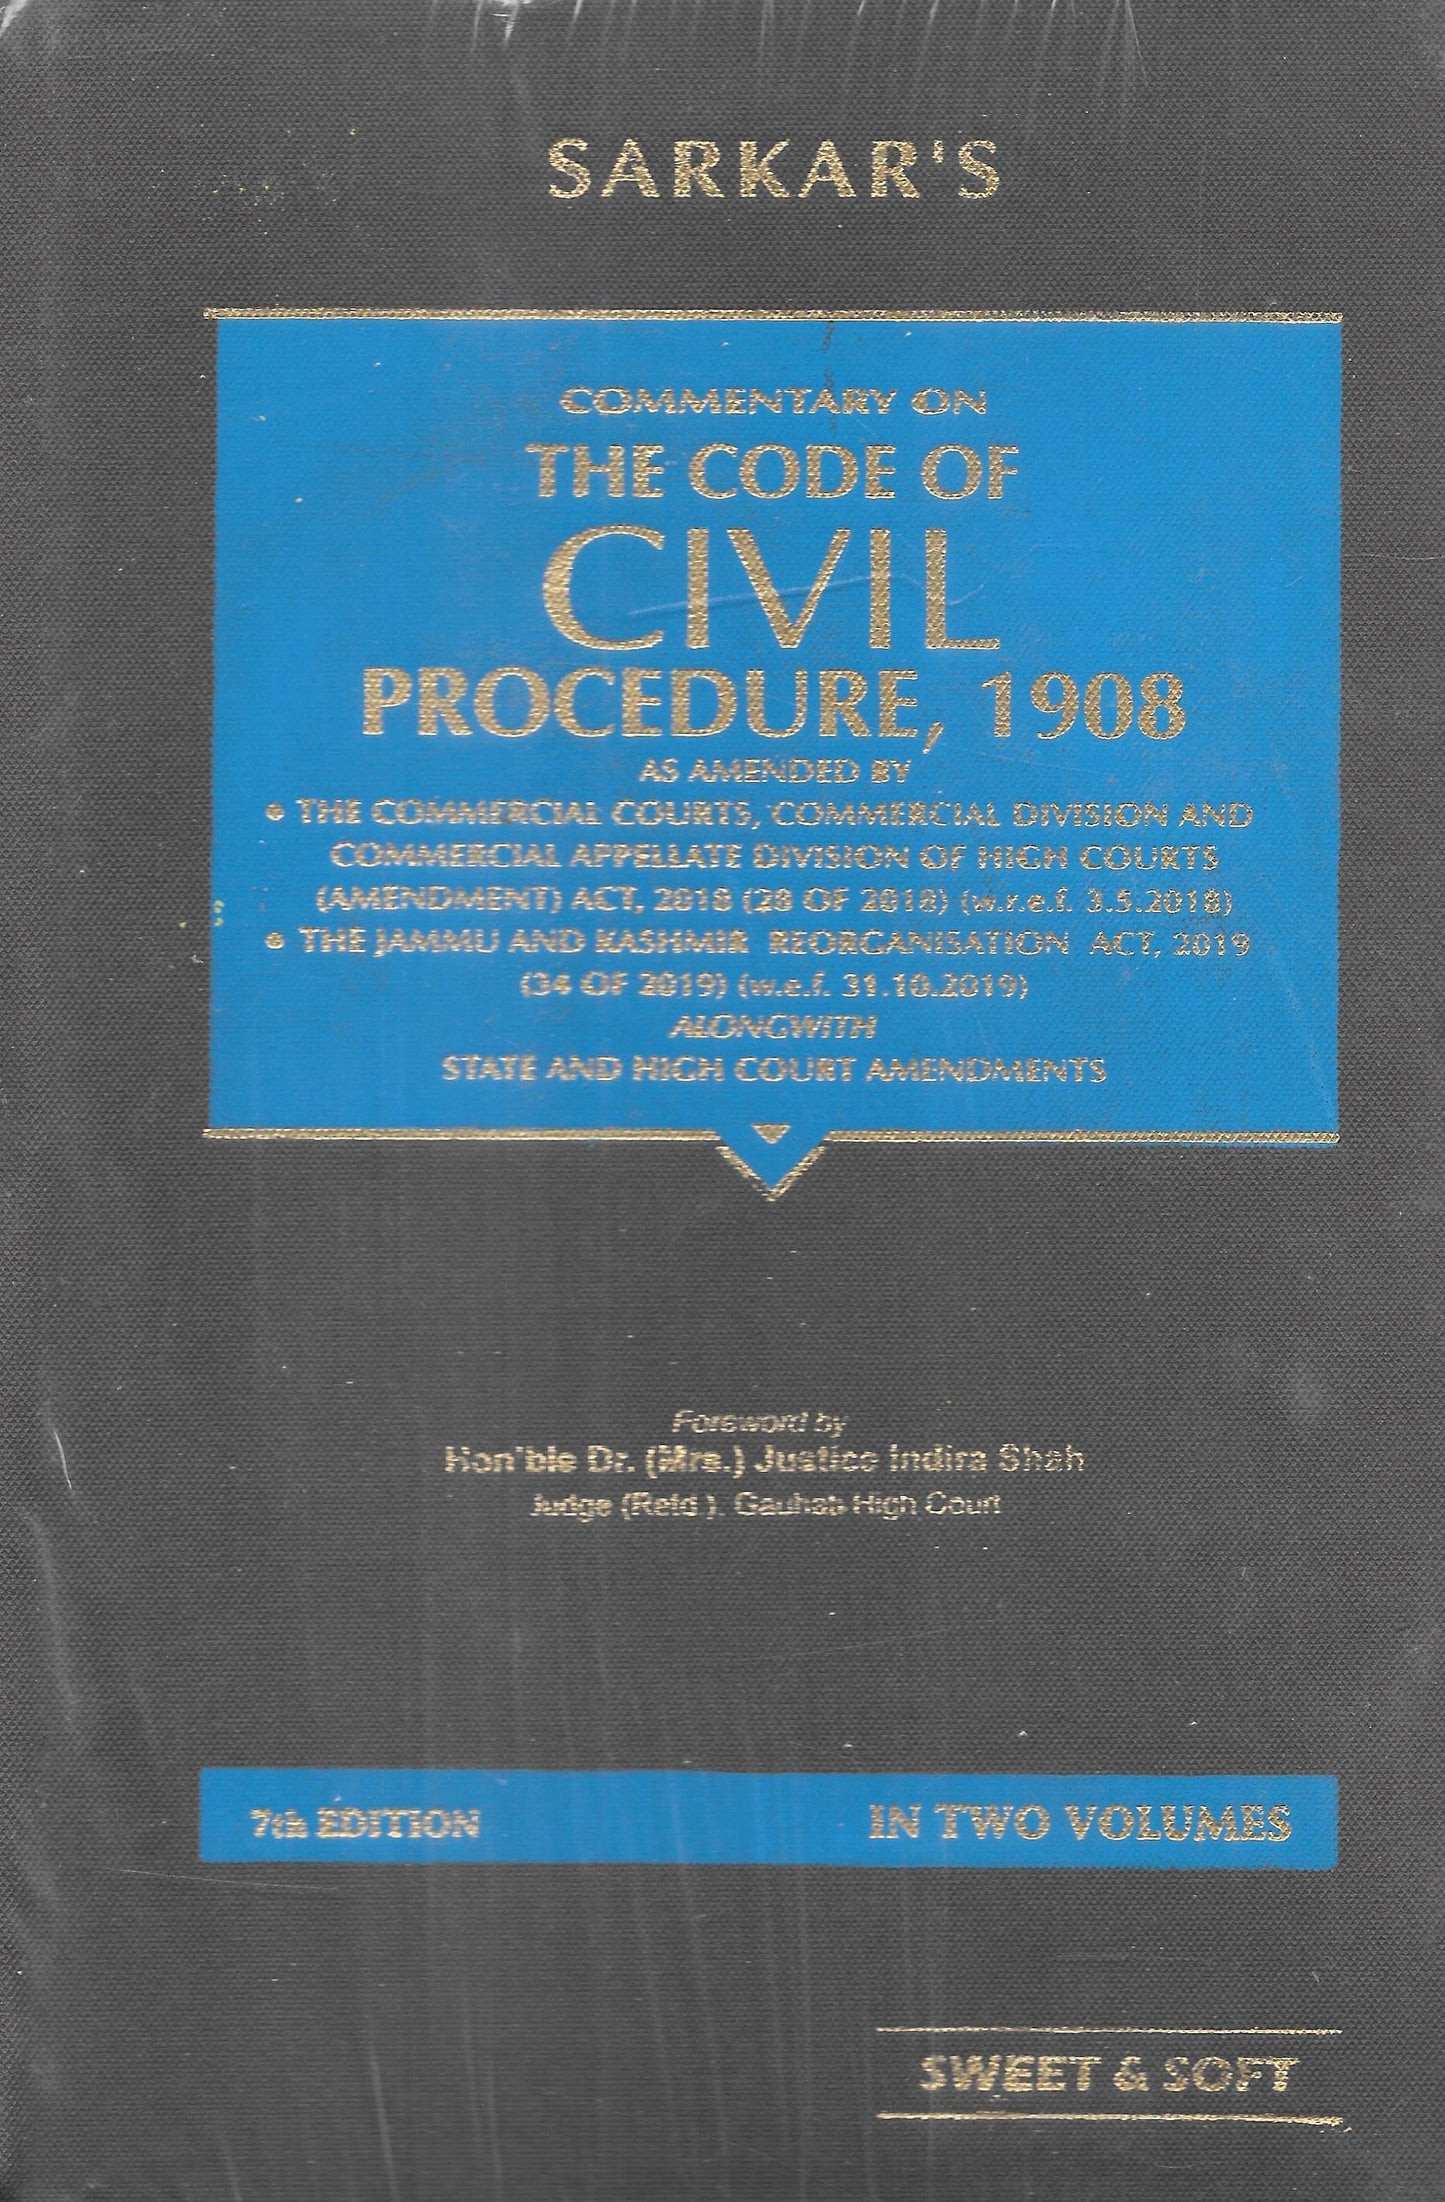 Commentary on The Code of Civil Procedure, 1908 in 2 vols